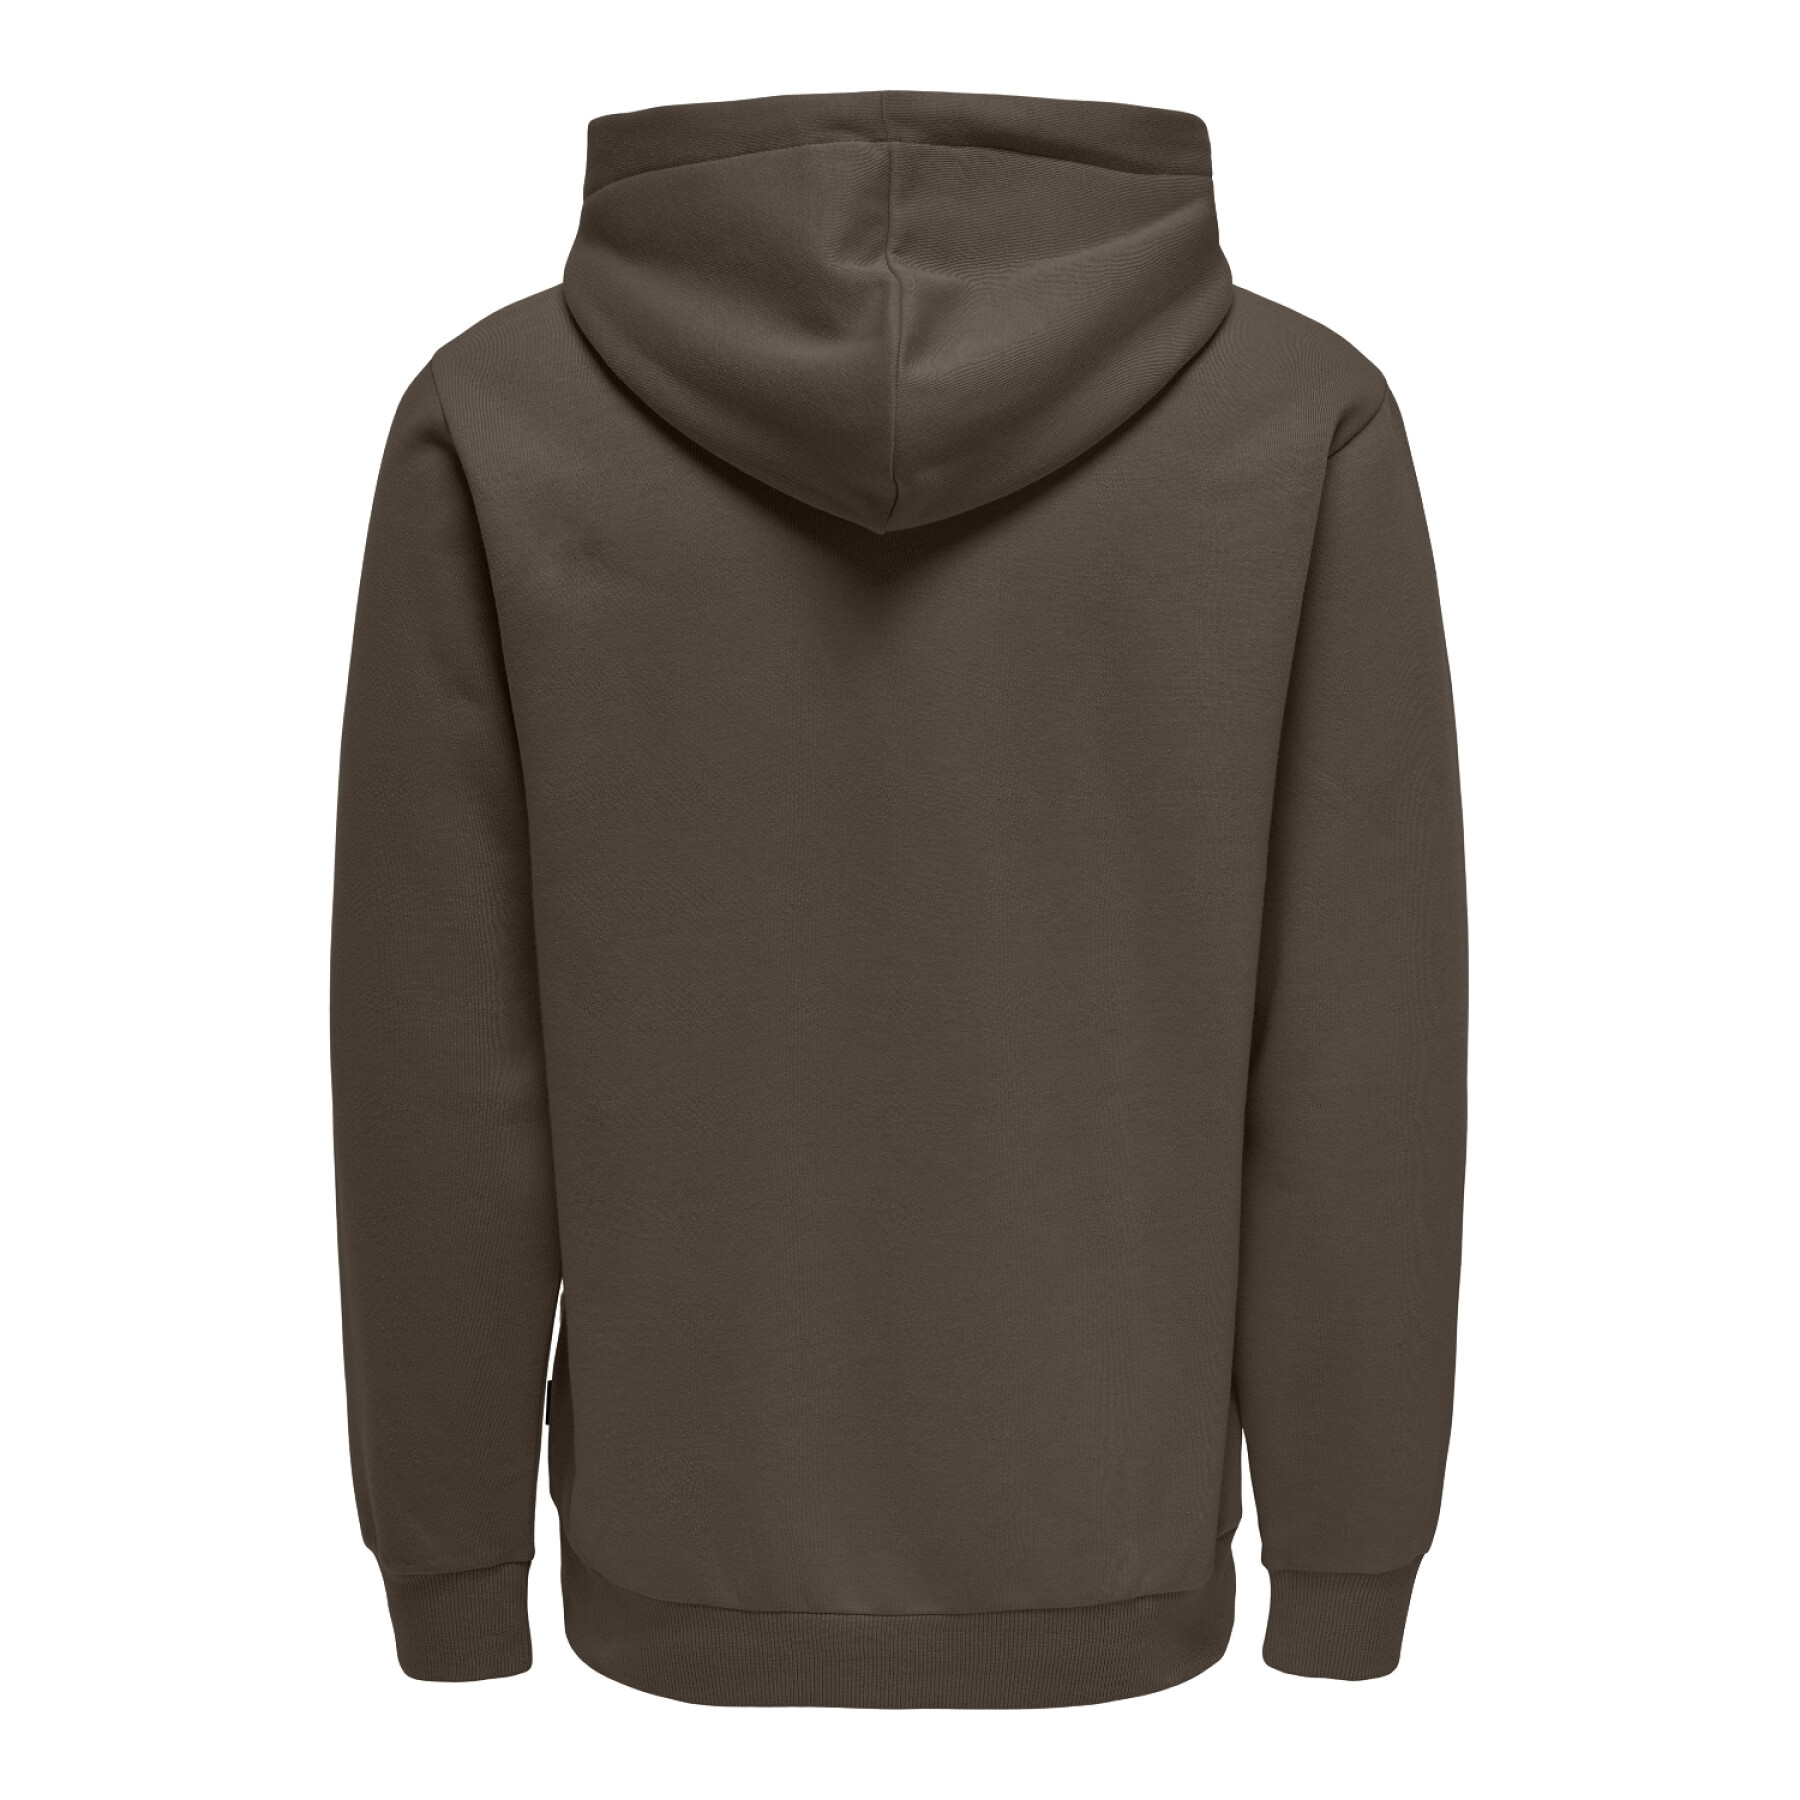 Hooded sweatshirt Only & Sons Ceres